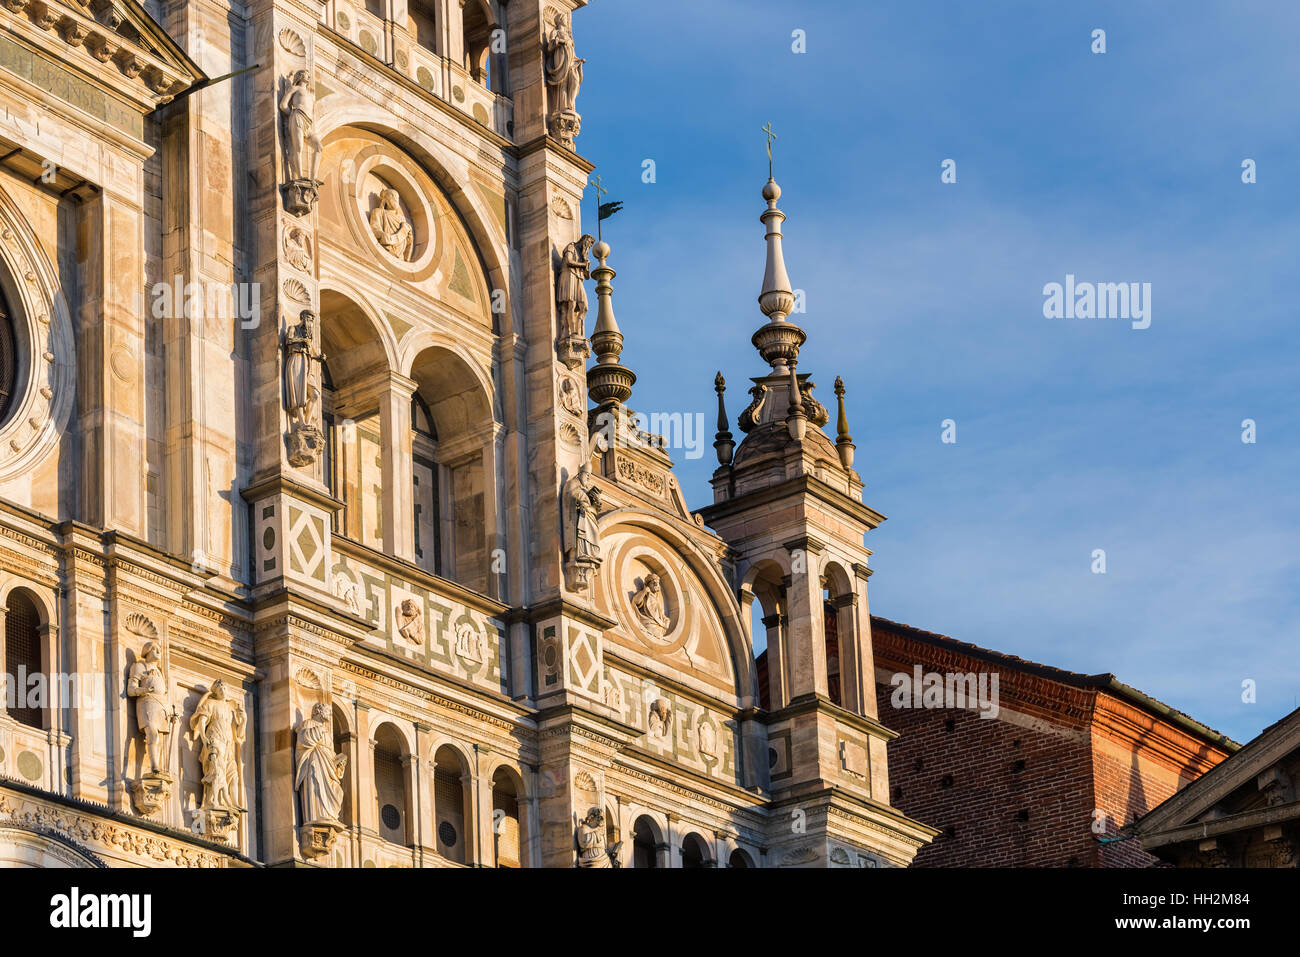 Wonderful marble statues from the Renaissance period of the Pavia Carthusian monastery facade at sunset,Italy. Copy space. Stock Photo